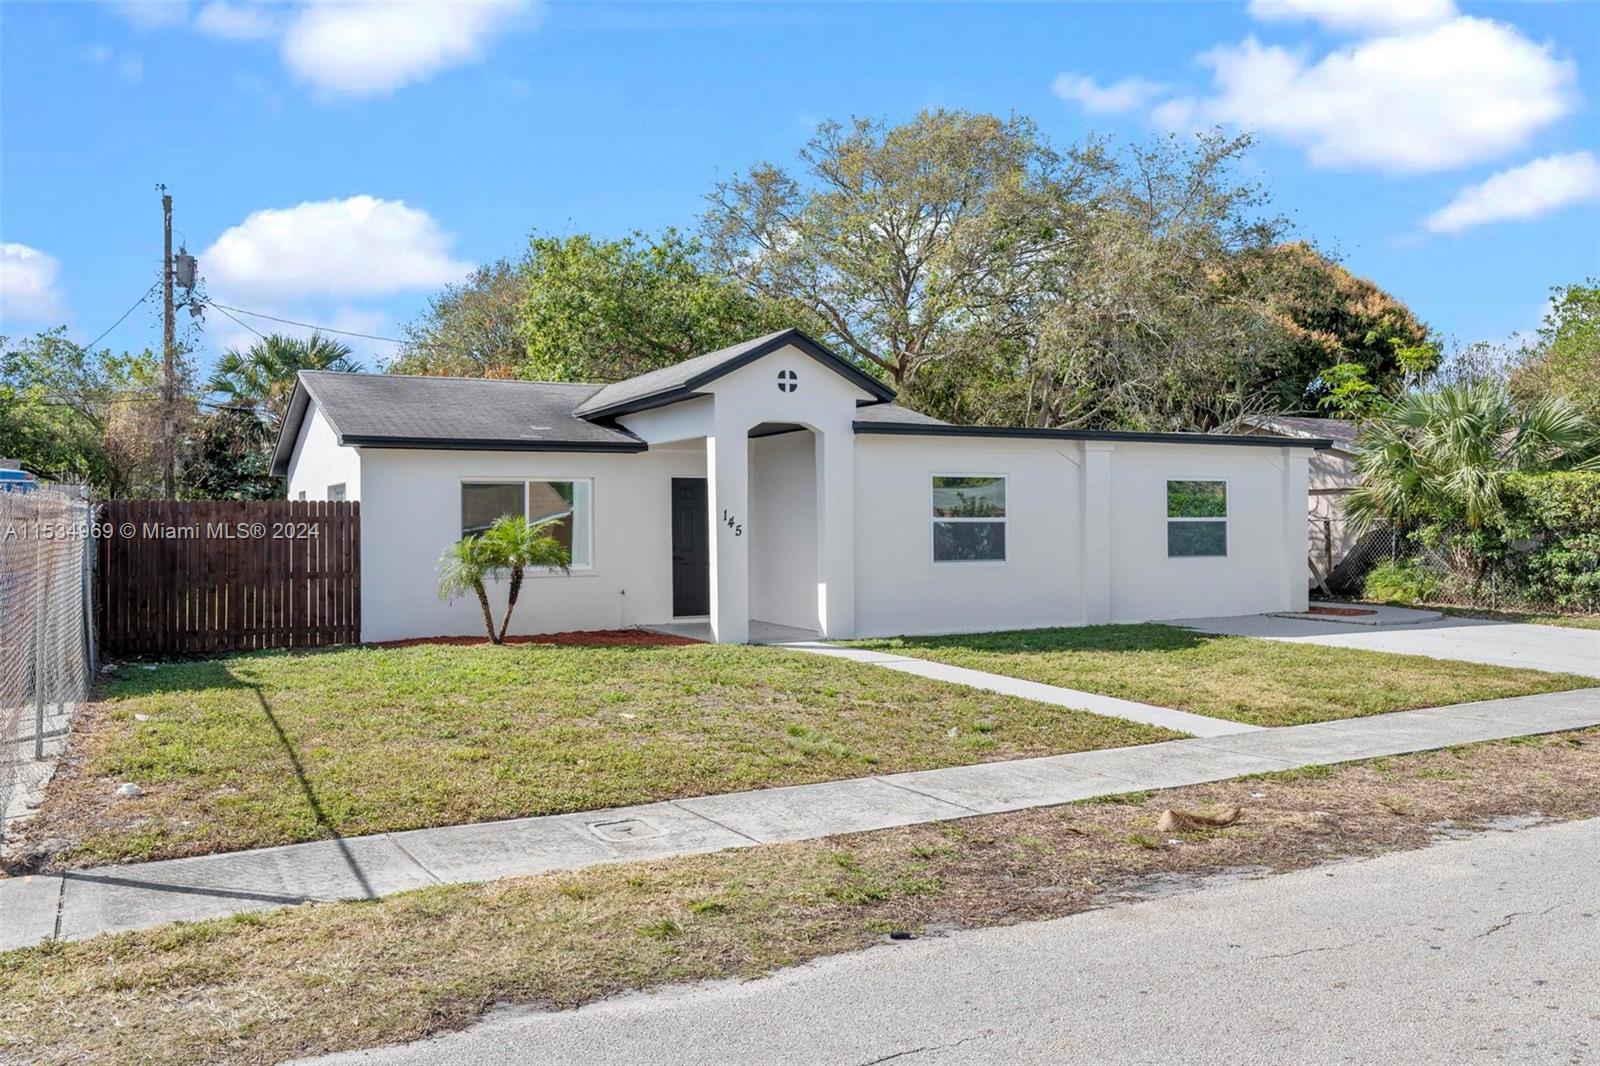 Property for Sale at 145 W 34th St St, Riviera Beach, Palm Beach County, Florida - Bedrooms: 3 
Bathrooms: 2  - $389,860